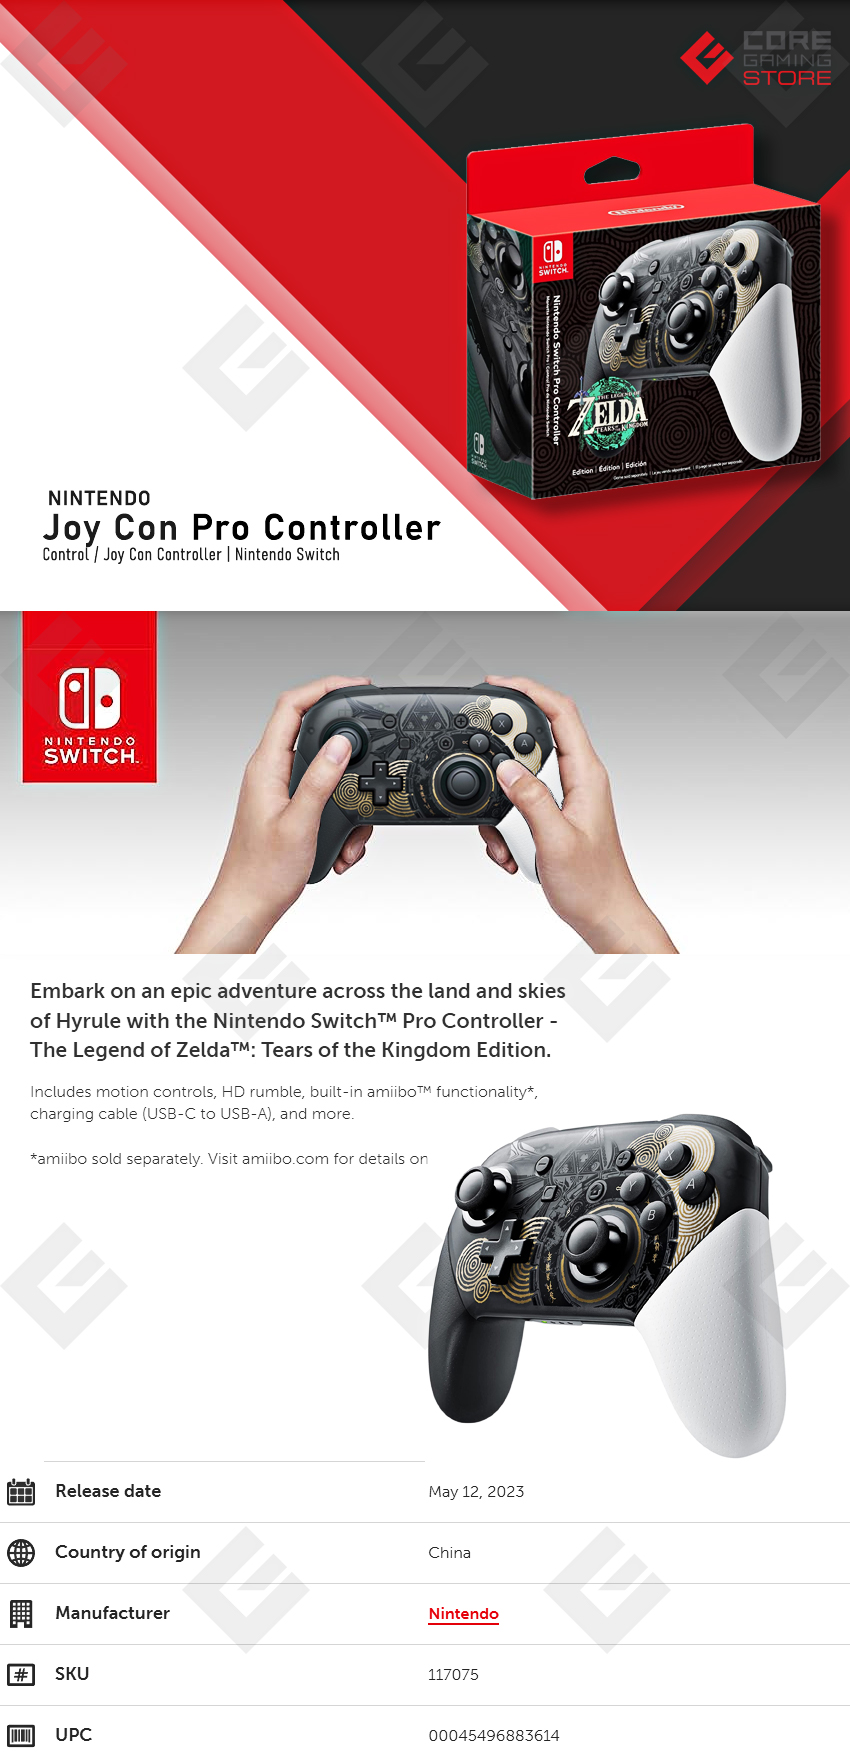 Nintendo Switch Pro Controller - The Legend Of Zelda: Tears Of The Kingdom Edition - 00045496883614